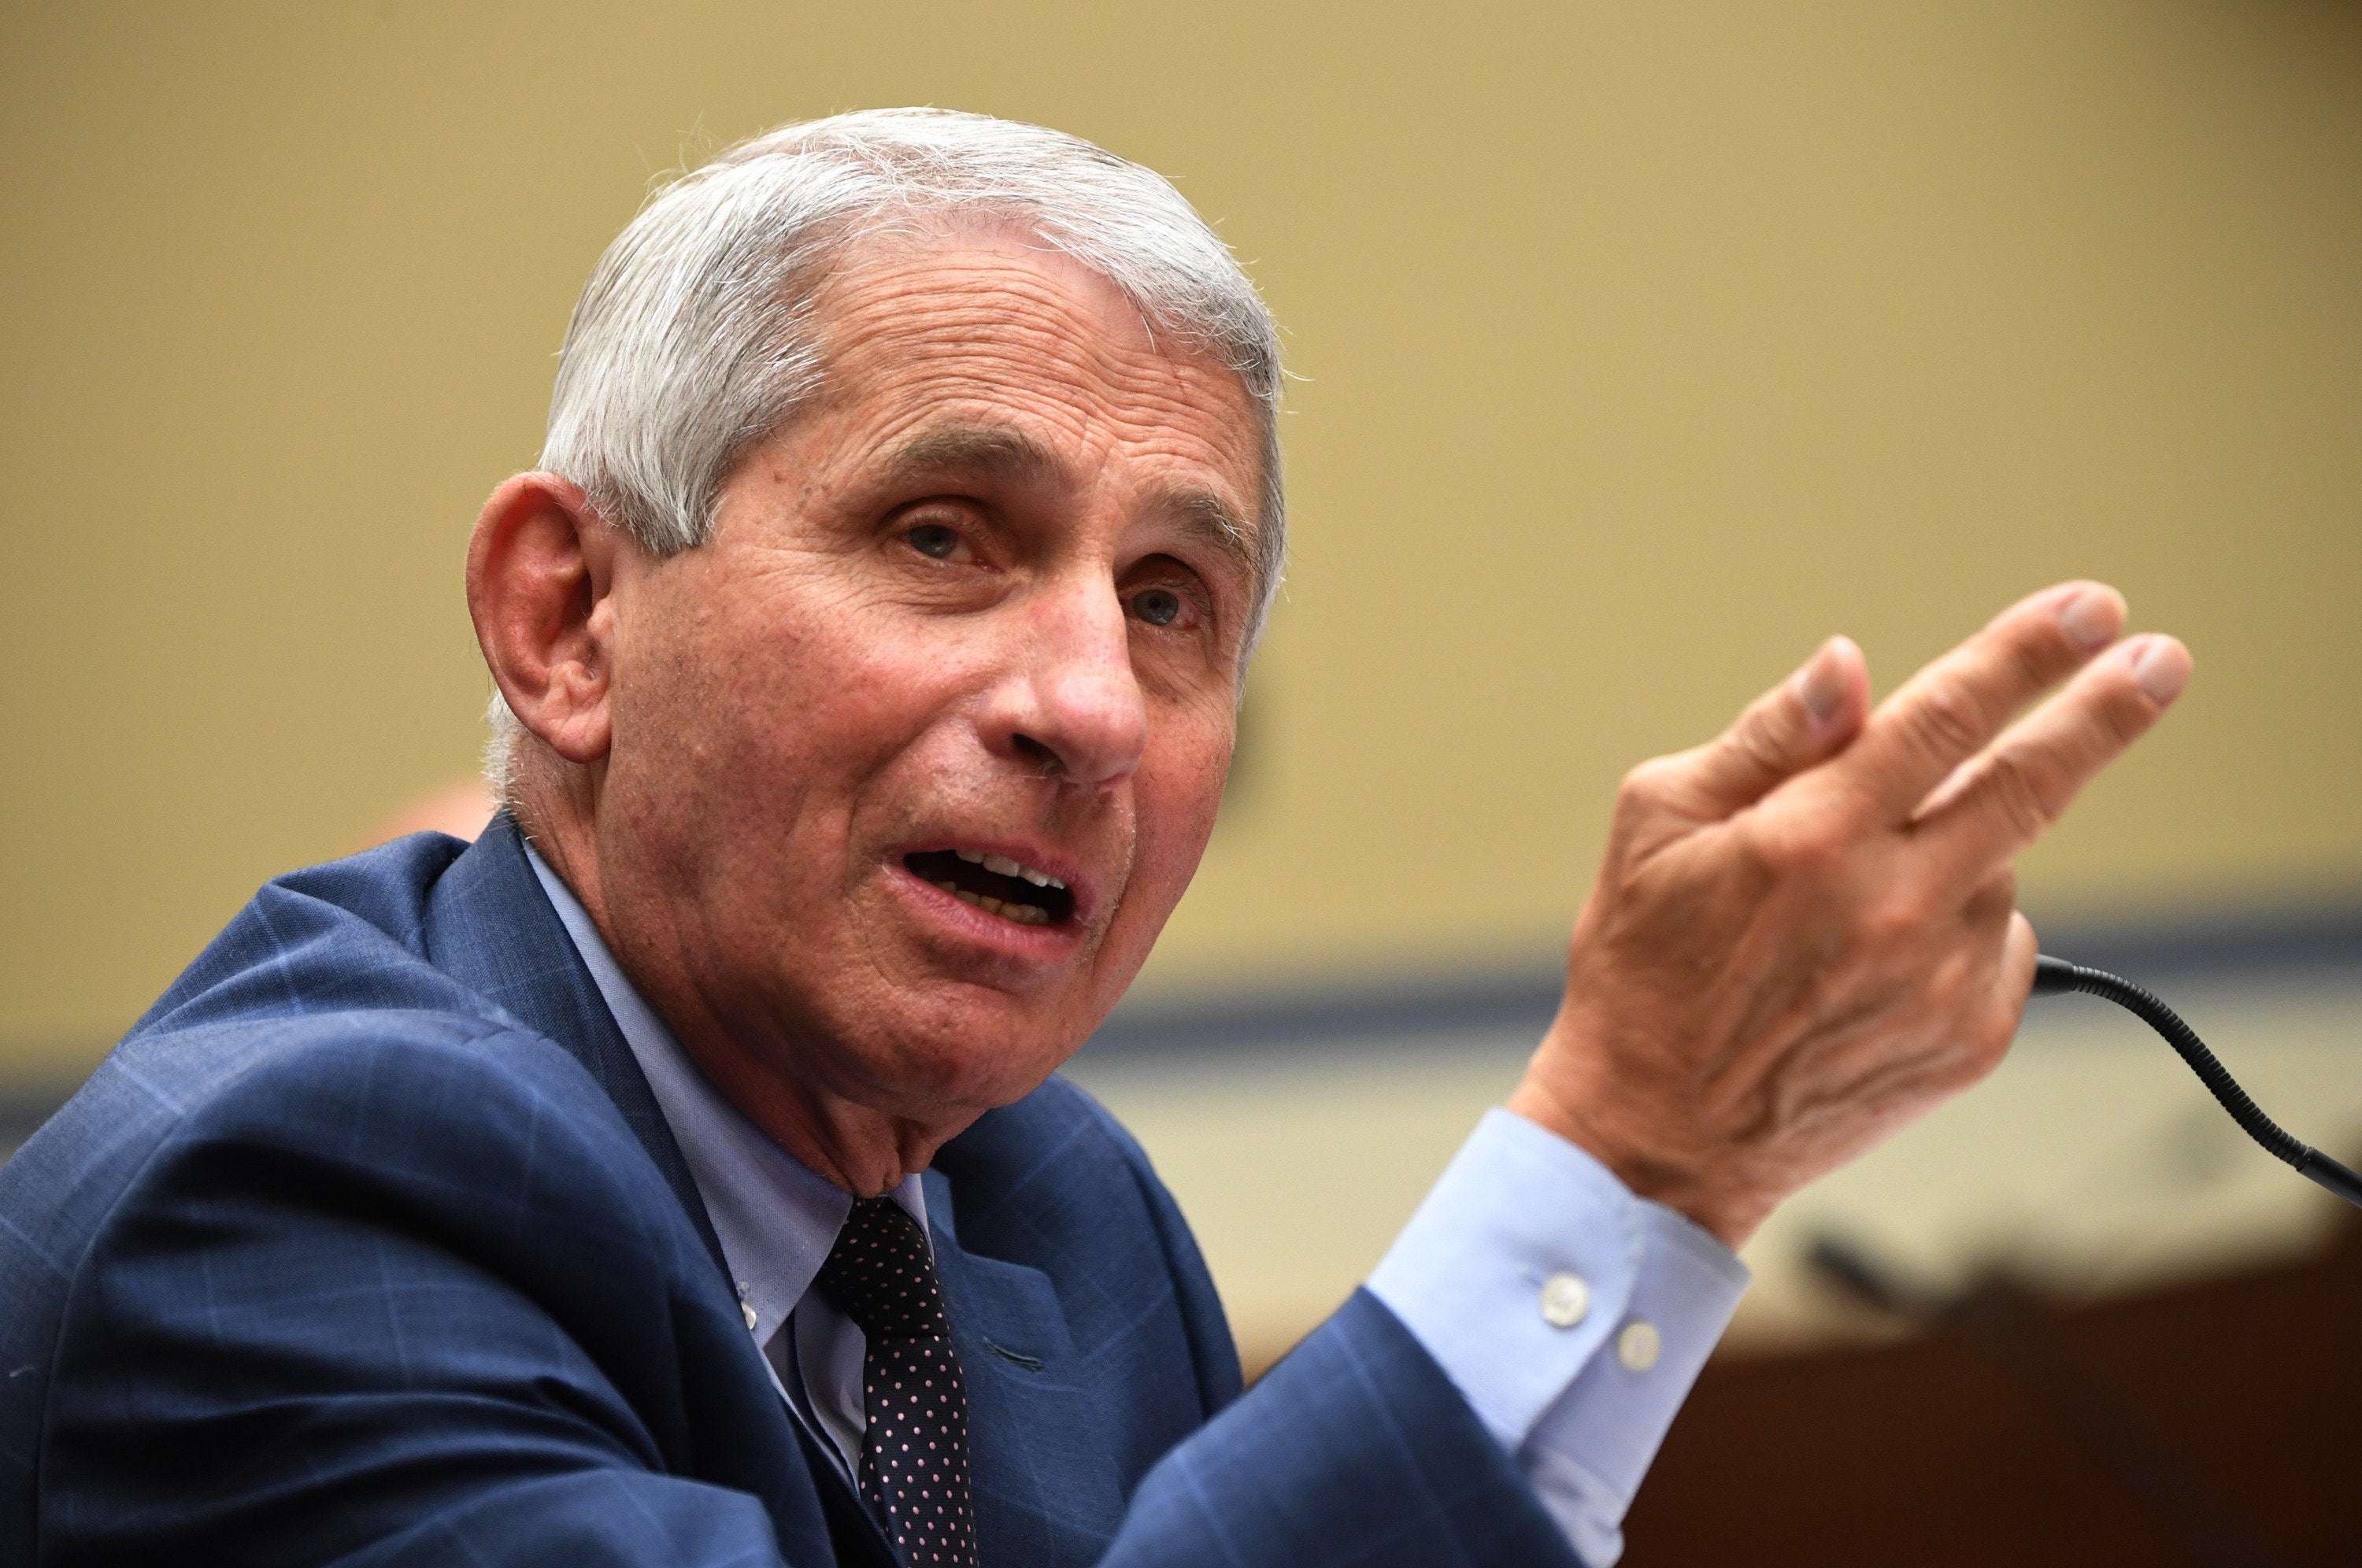 image for Dr Anthony Fauci is the only figure to find his approval rating rise after being associated with Donald Trump